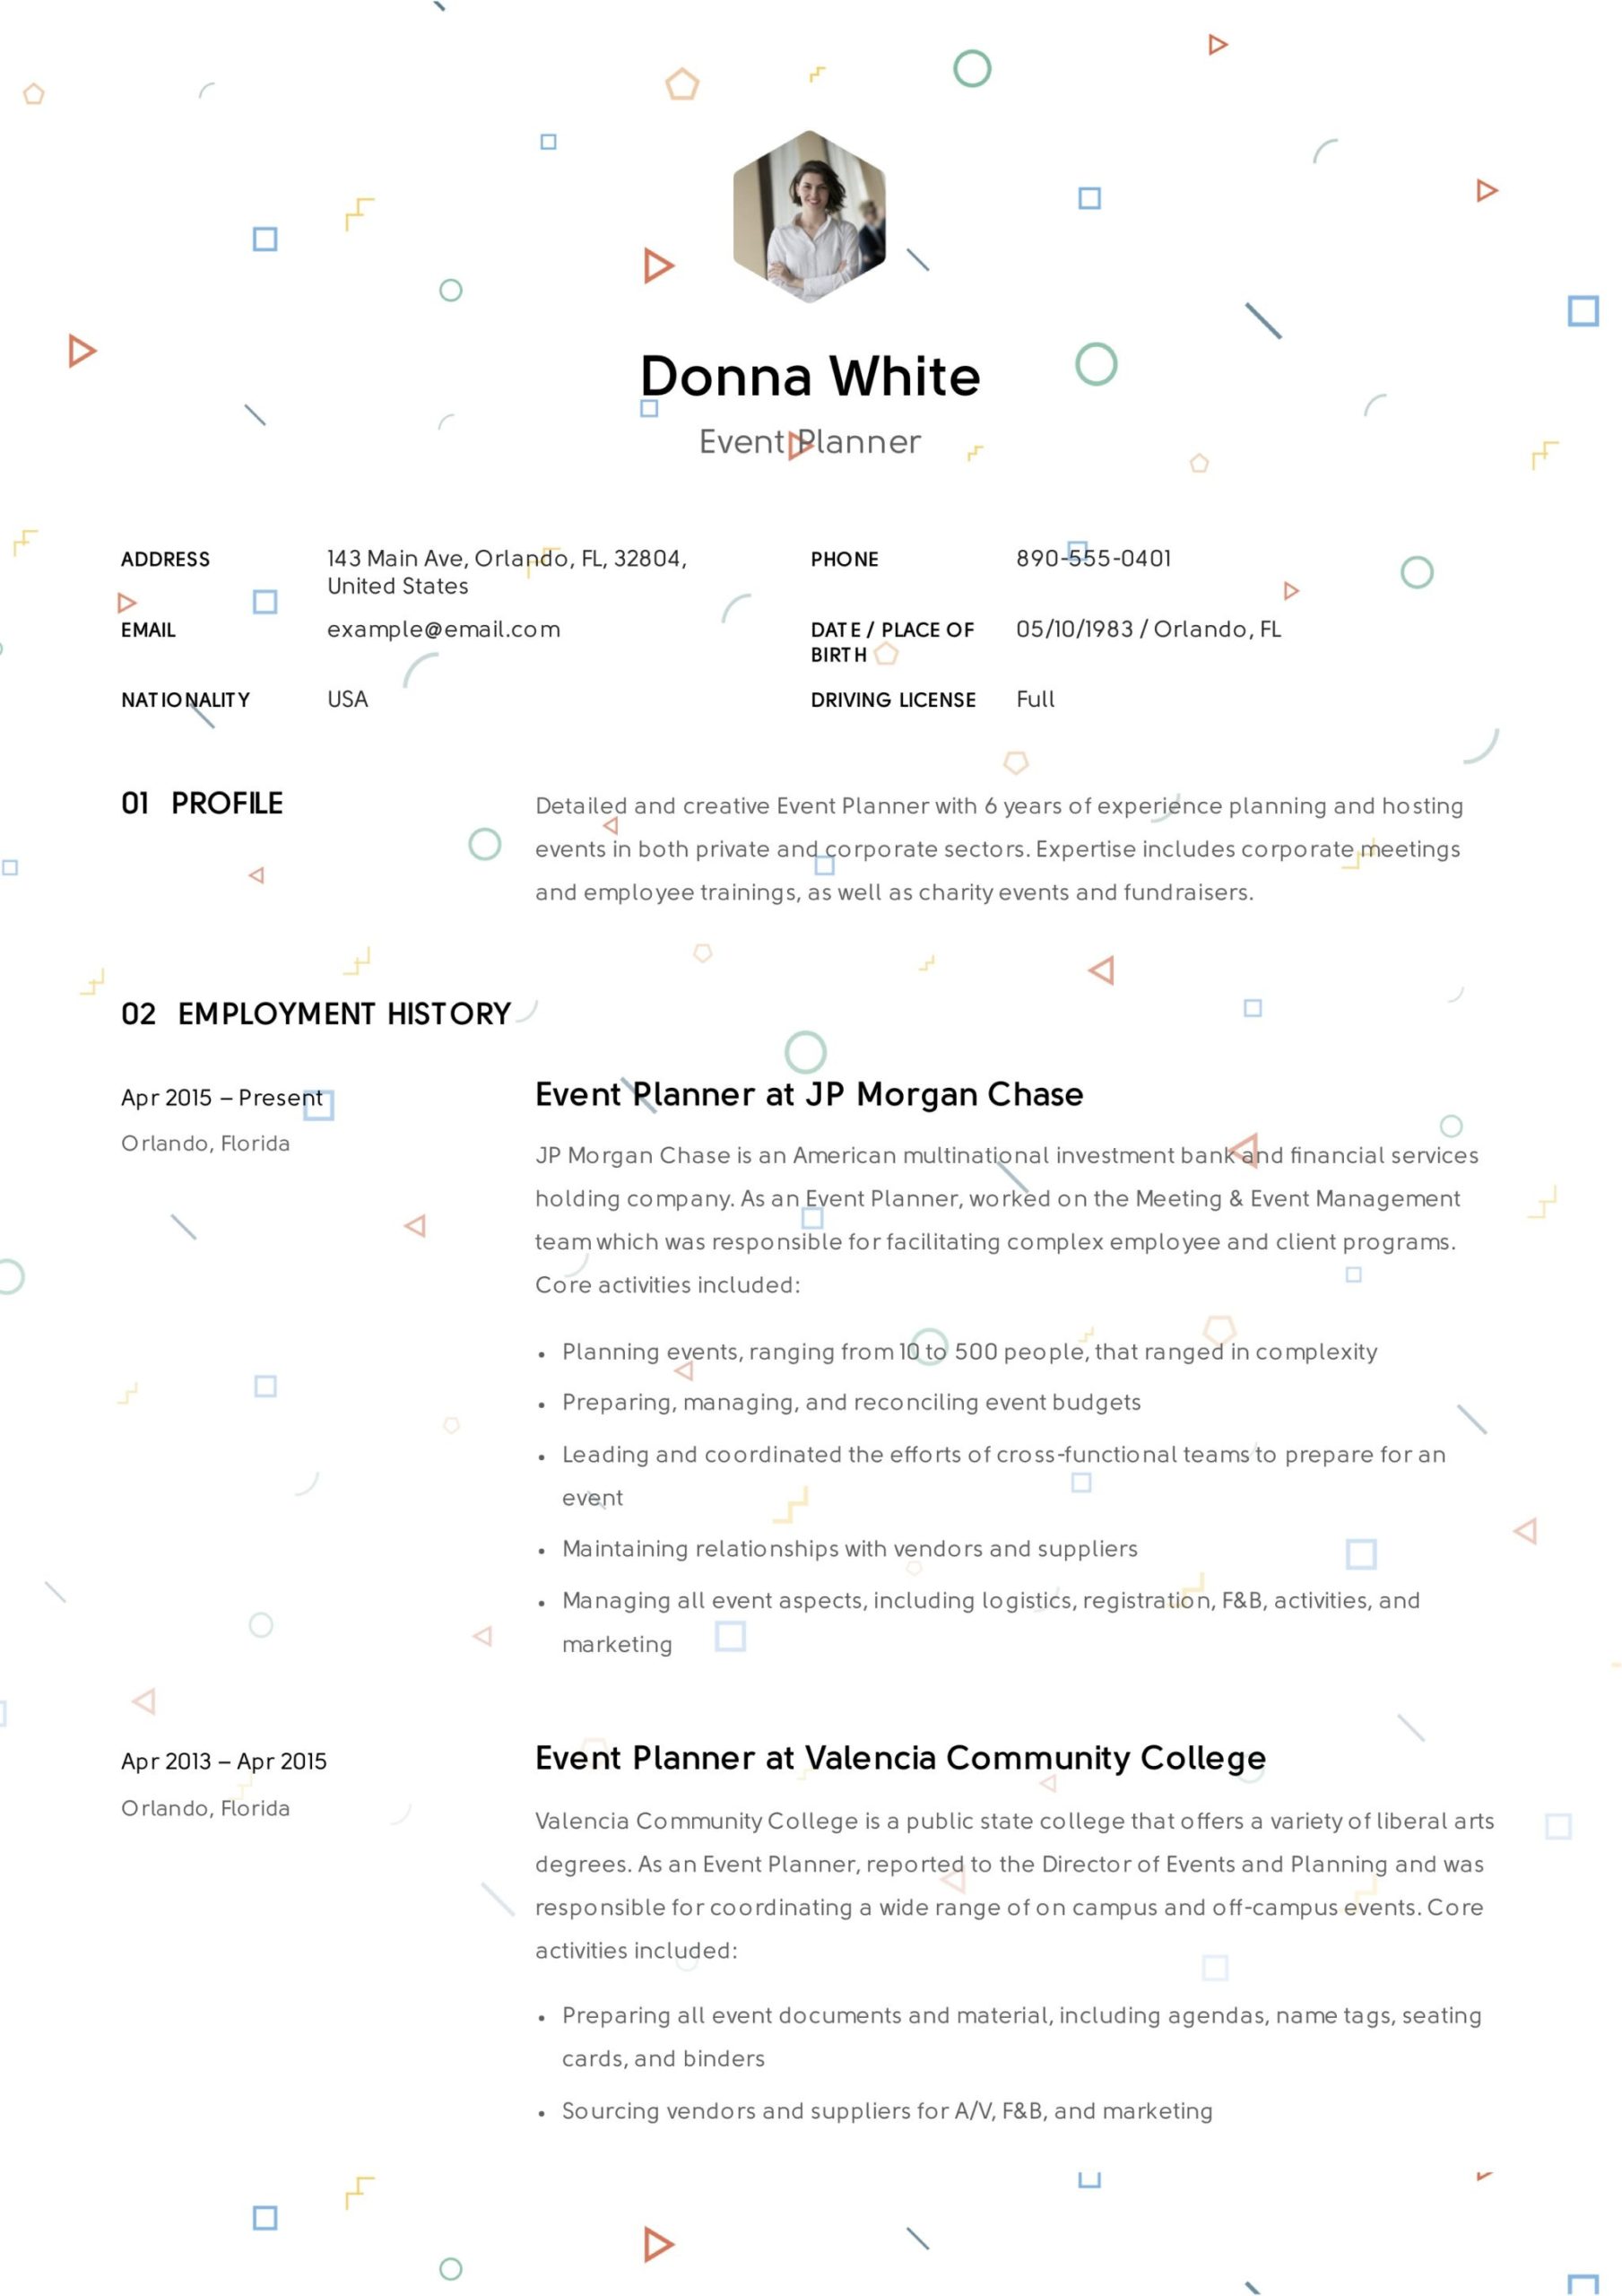 Party Planning event Layout Resume Samples Guide: event Planner Resume 12 Templates Pdf 2022